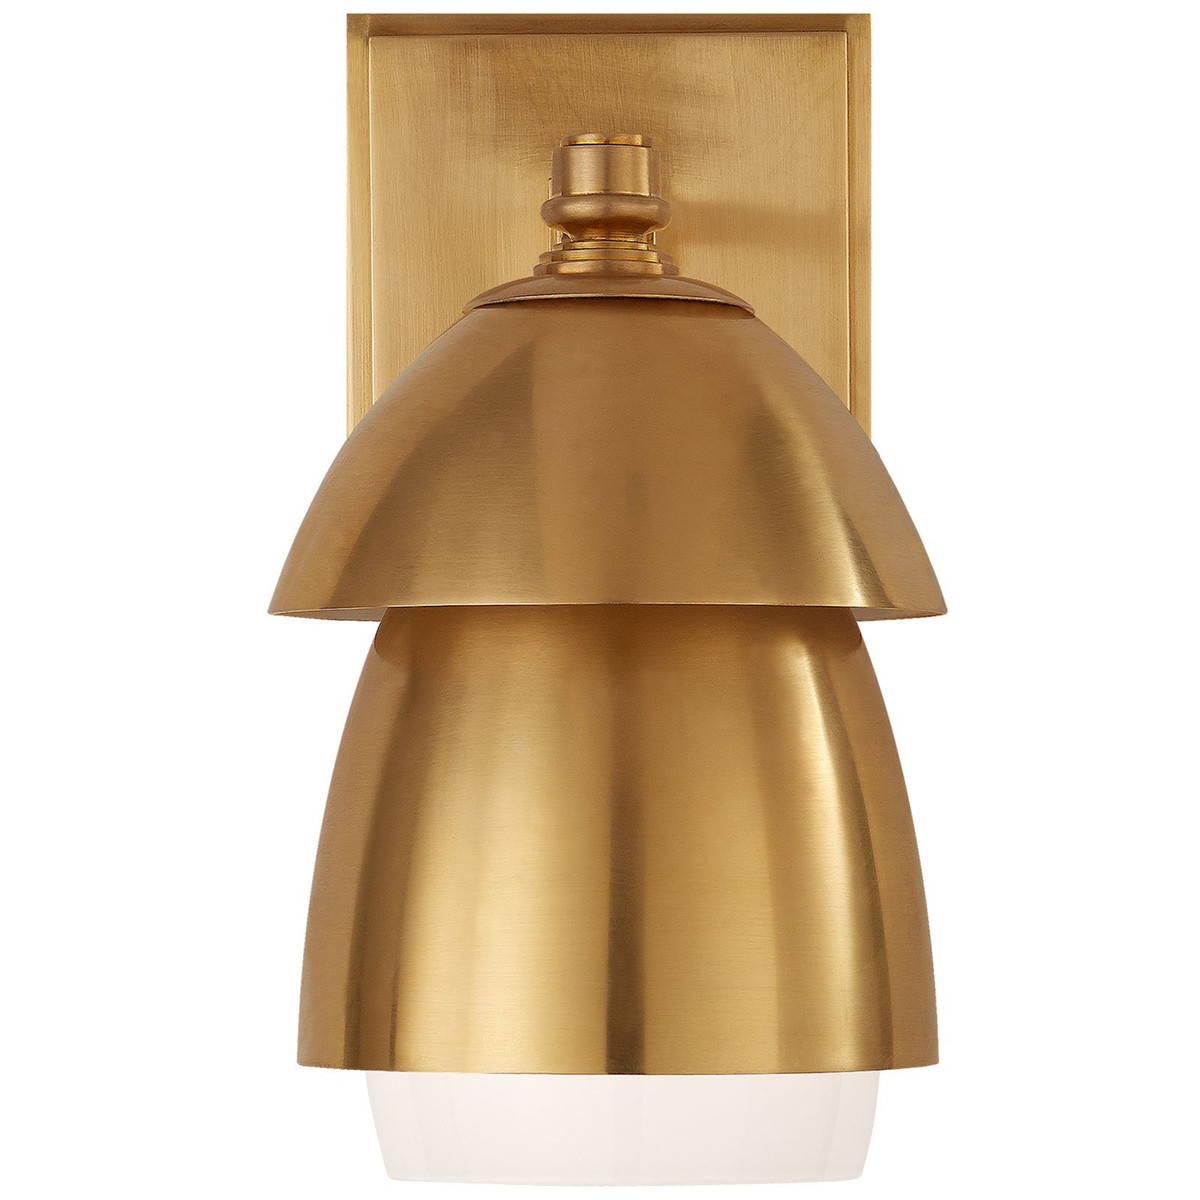 Whitman Small Brass Sconce